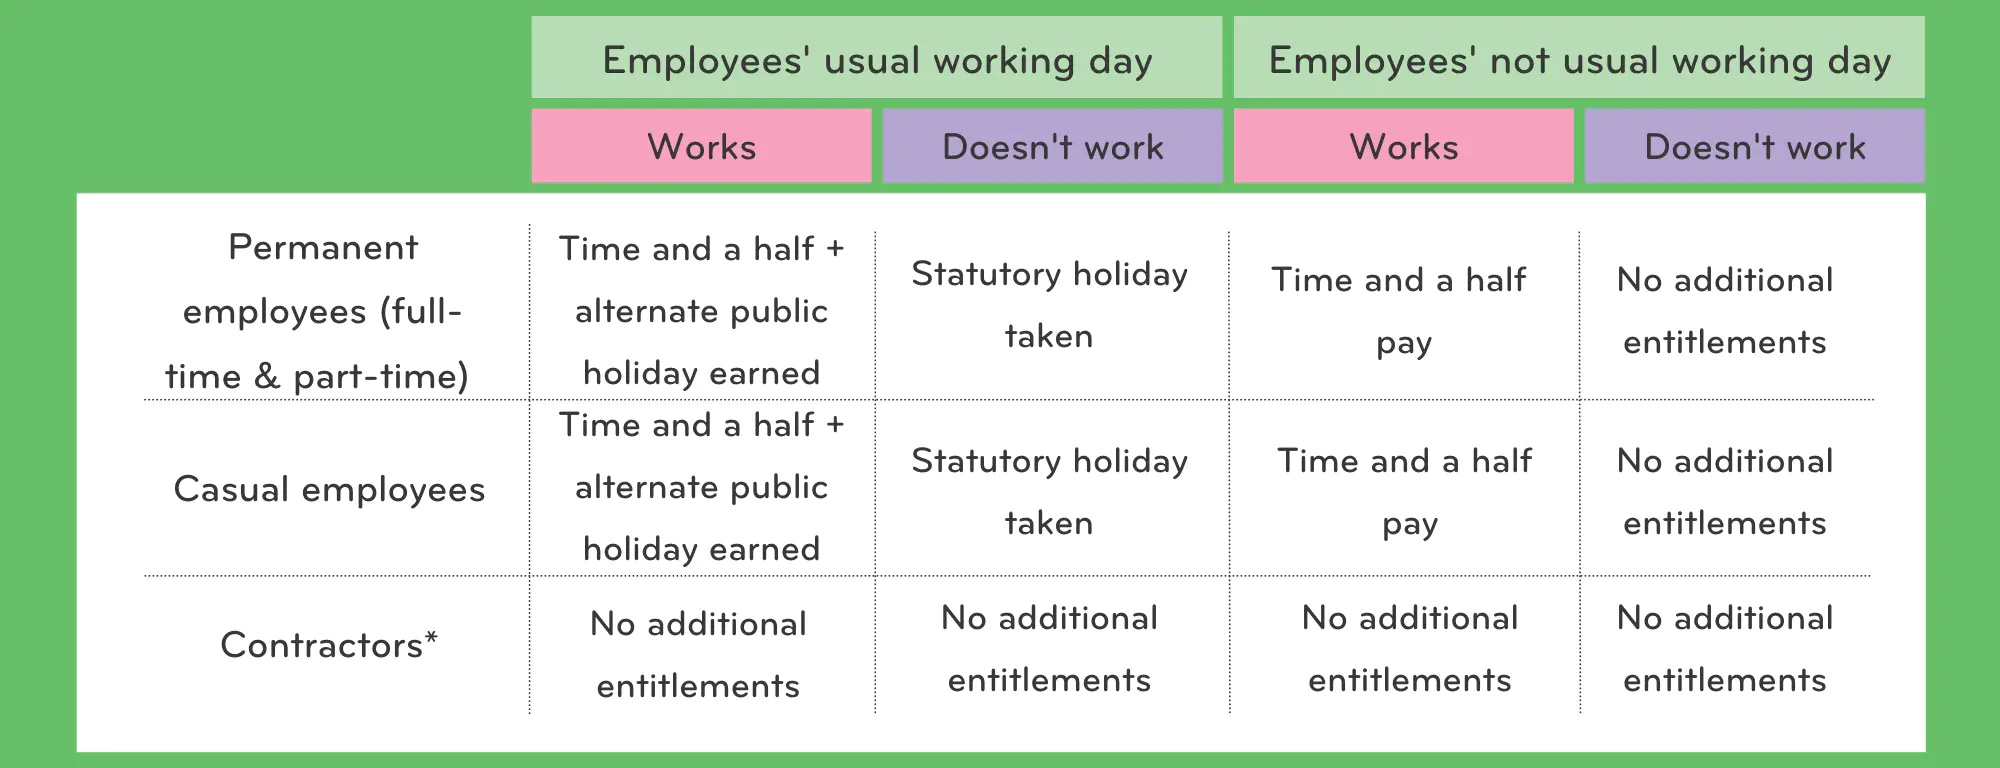 Entitlements for permanent employees, casual employees and contractors